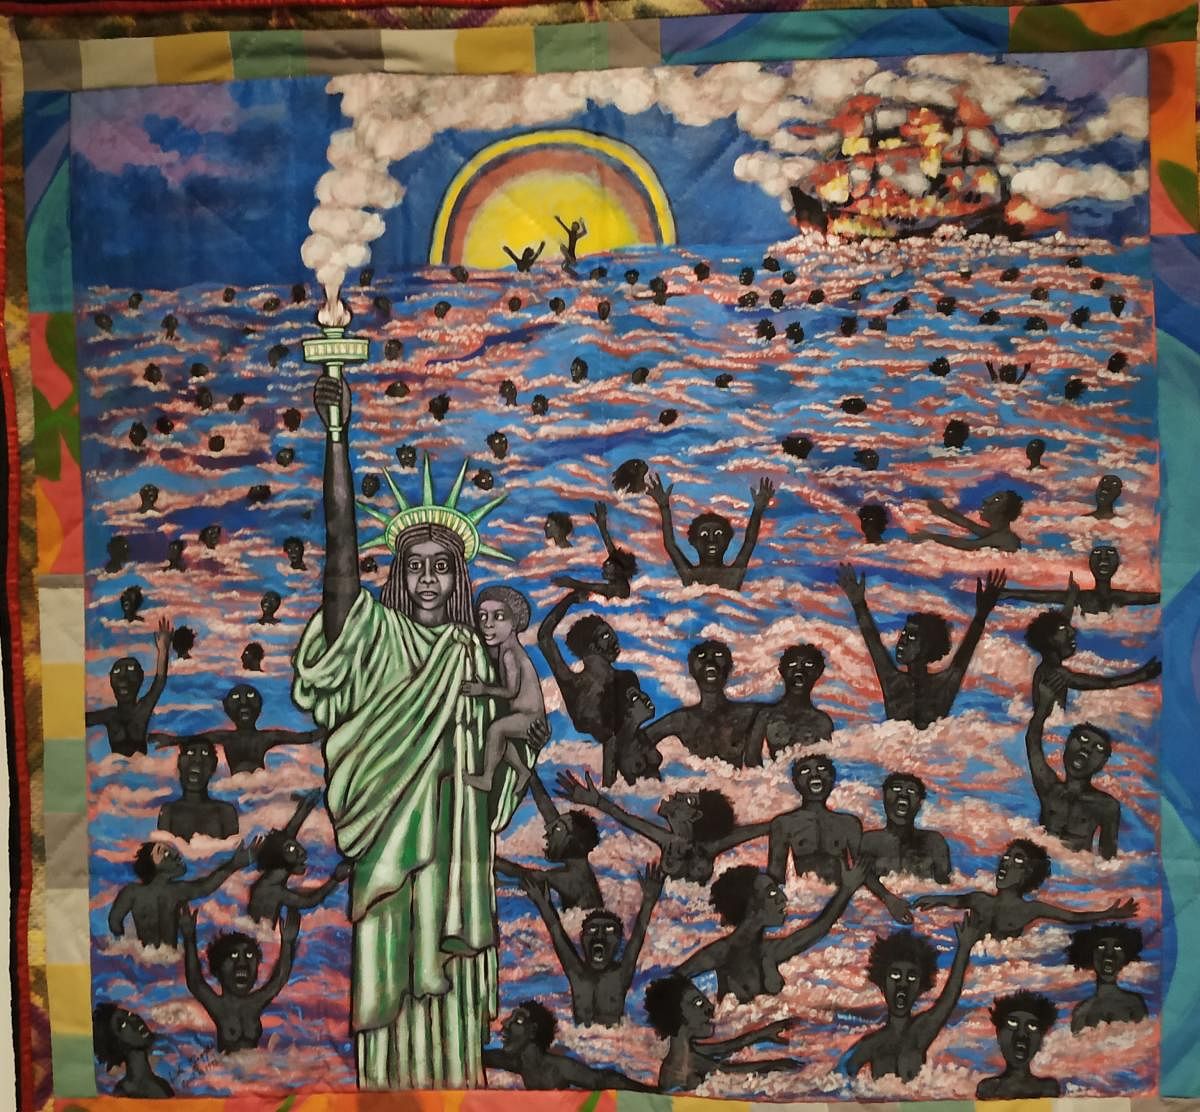 We came to America  by Faith Ringgold